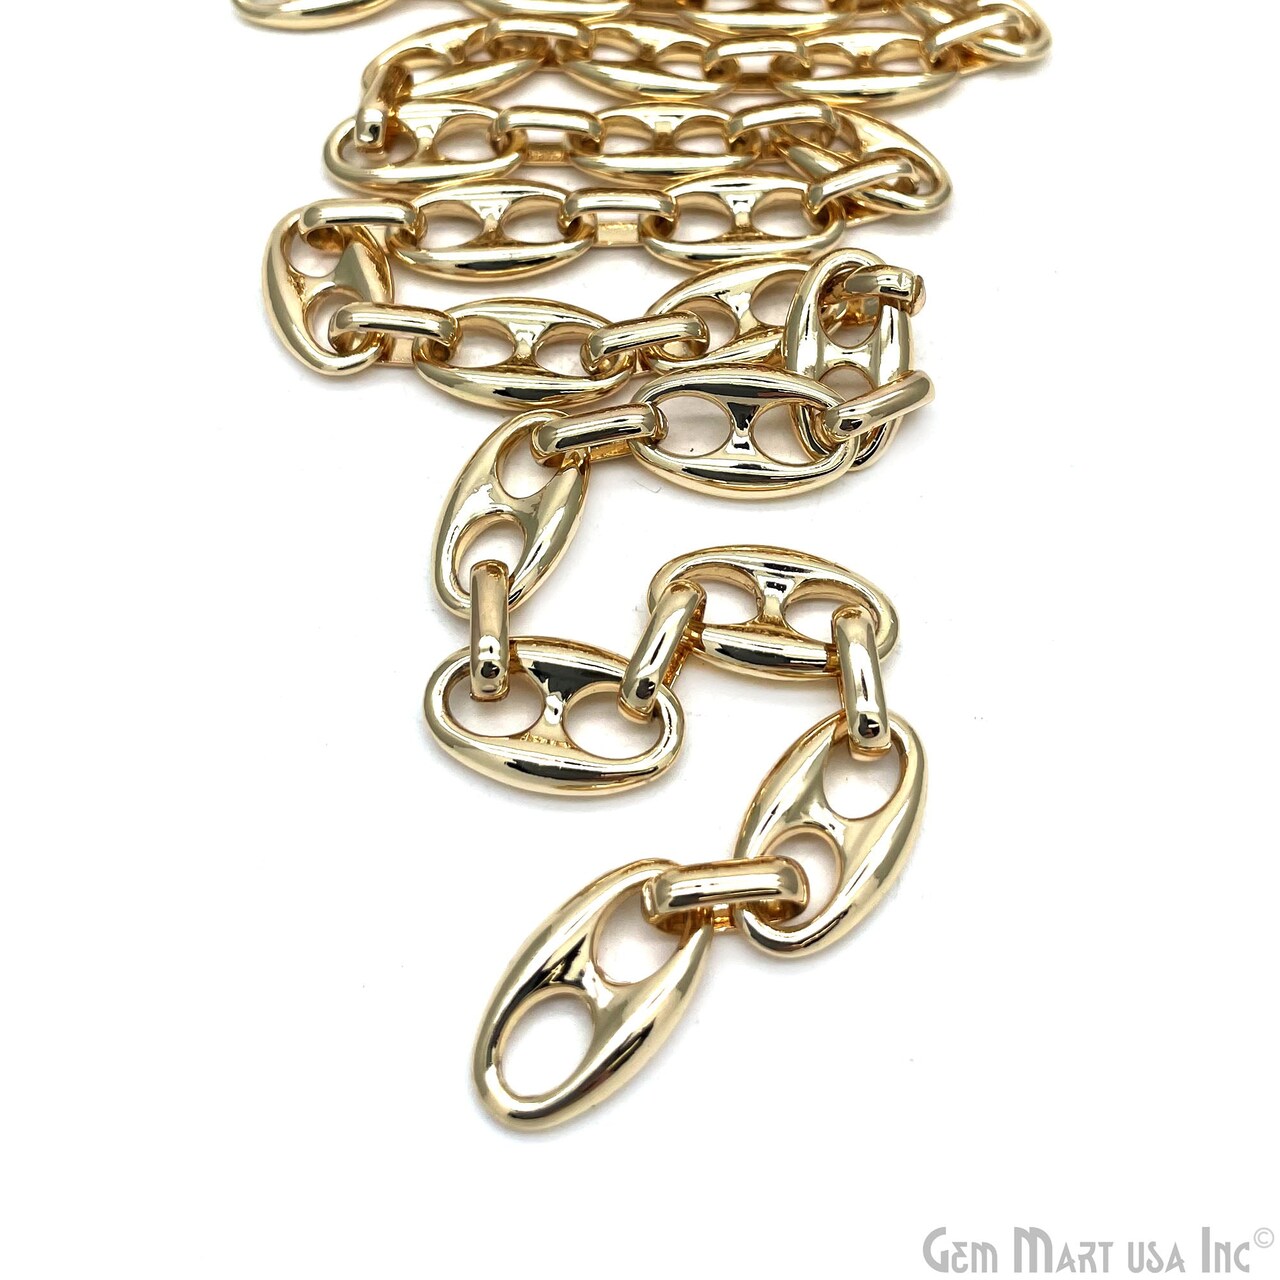 Gold Finding Chain, Gold Plated Jewelry Making Chain, DIY Necklace Chain,  Assorted Styles, 1 foot, GemMartUSA (GPCH)